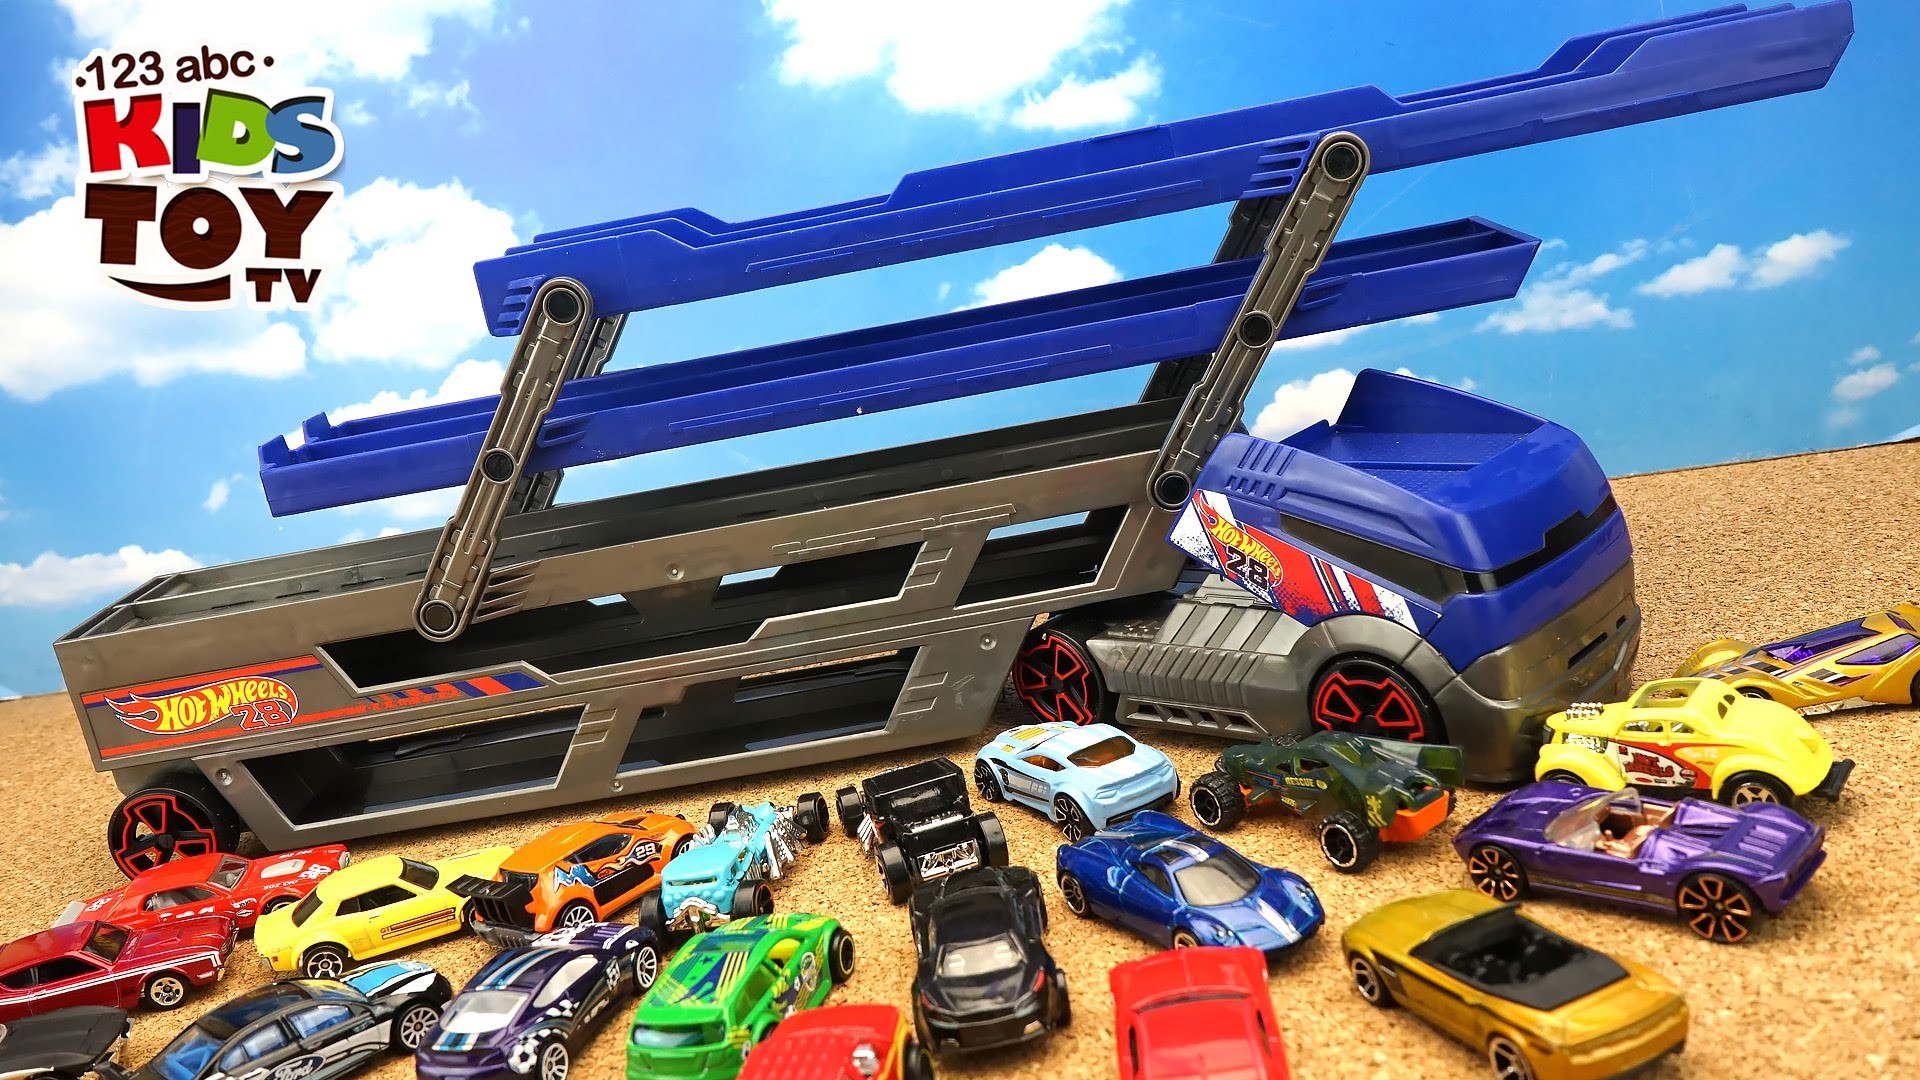 1920x1080 Hot Wheels Transporter and 40 Cars! 